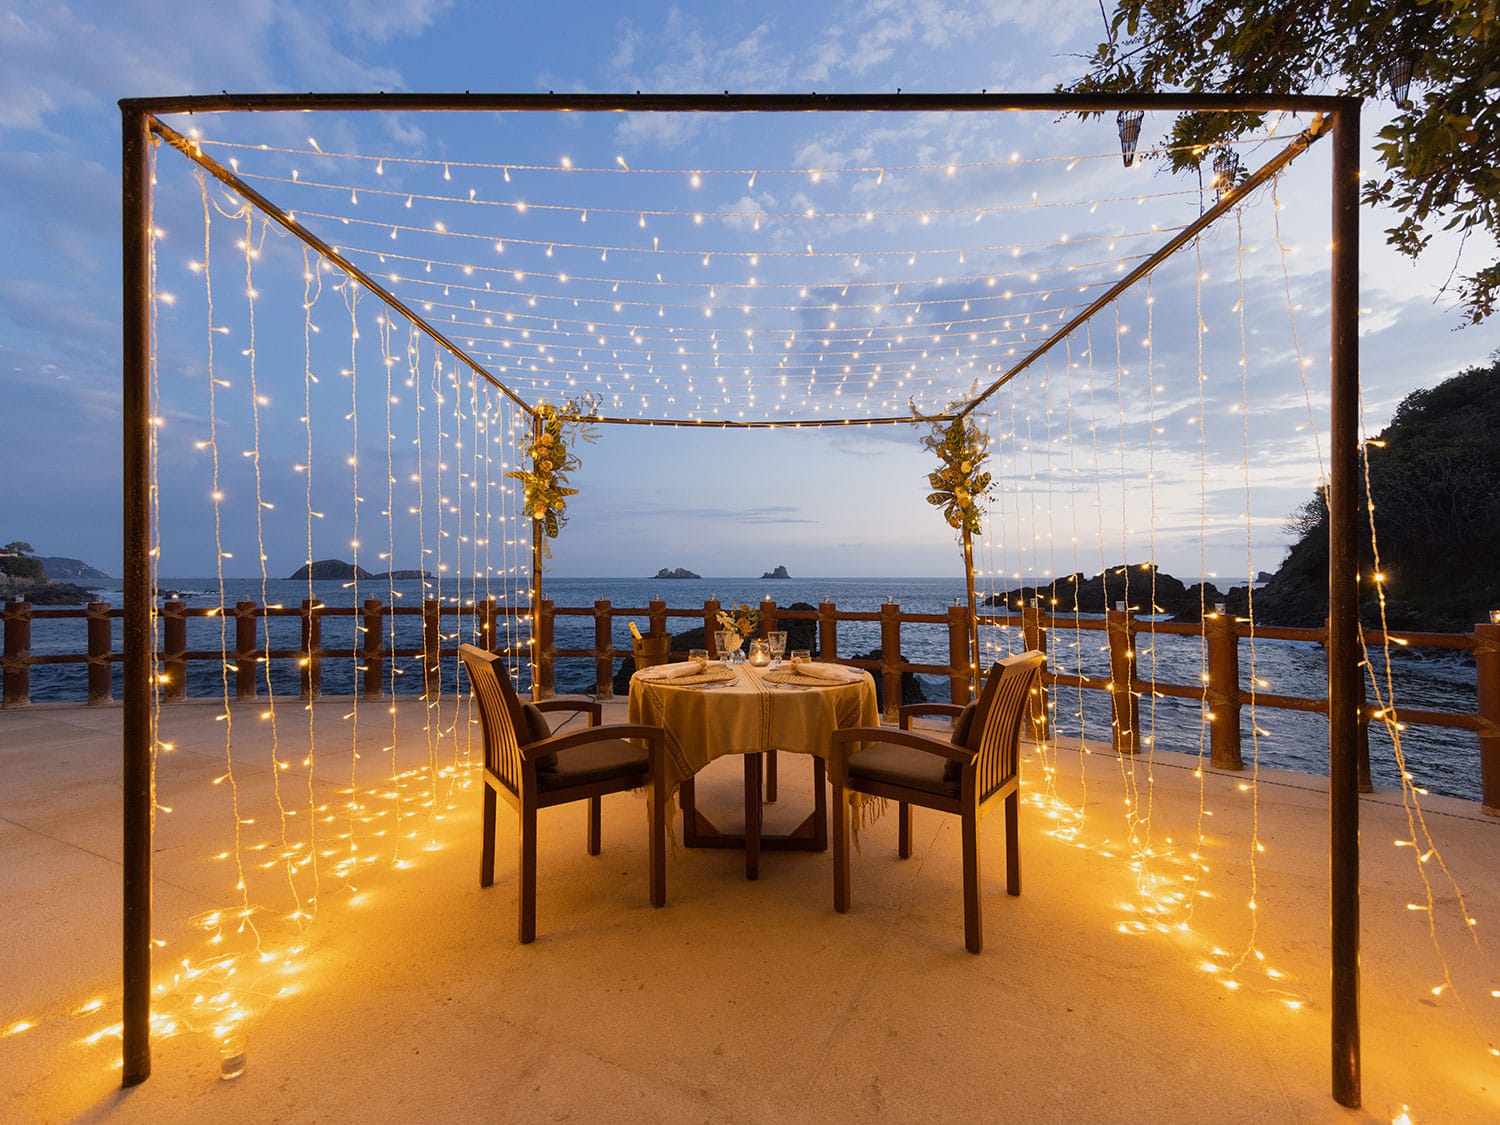 The romantic dining setting for couples at Cala de Mar Resort and Spa in Mexico.